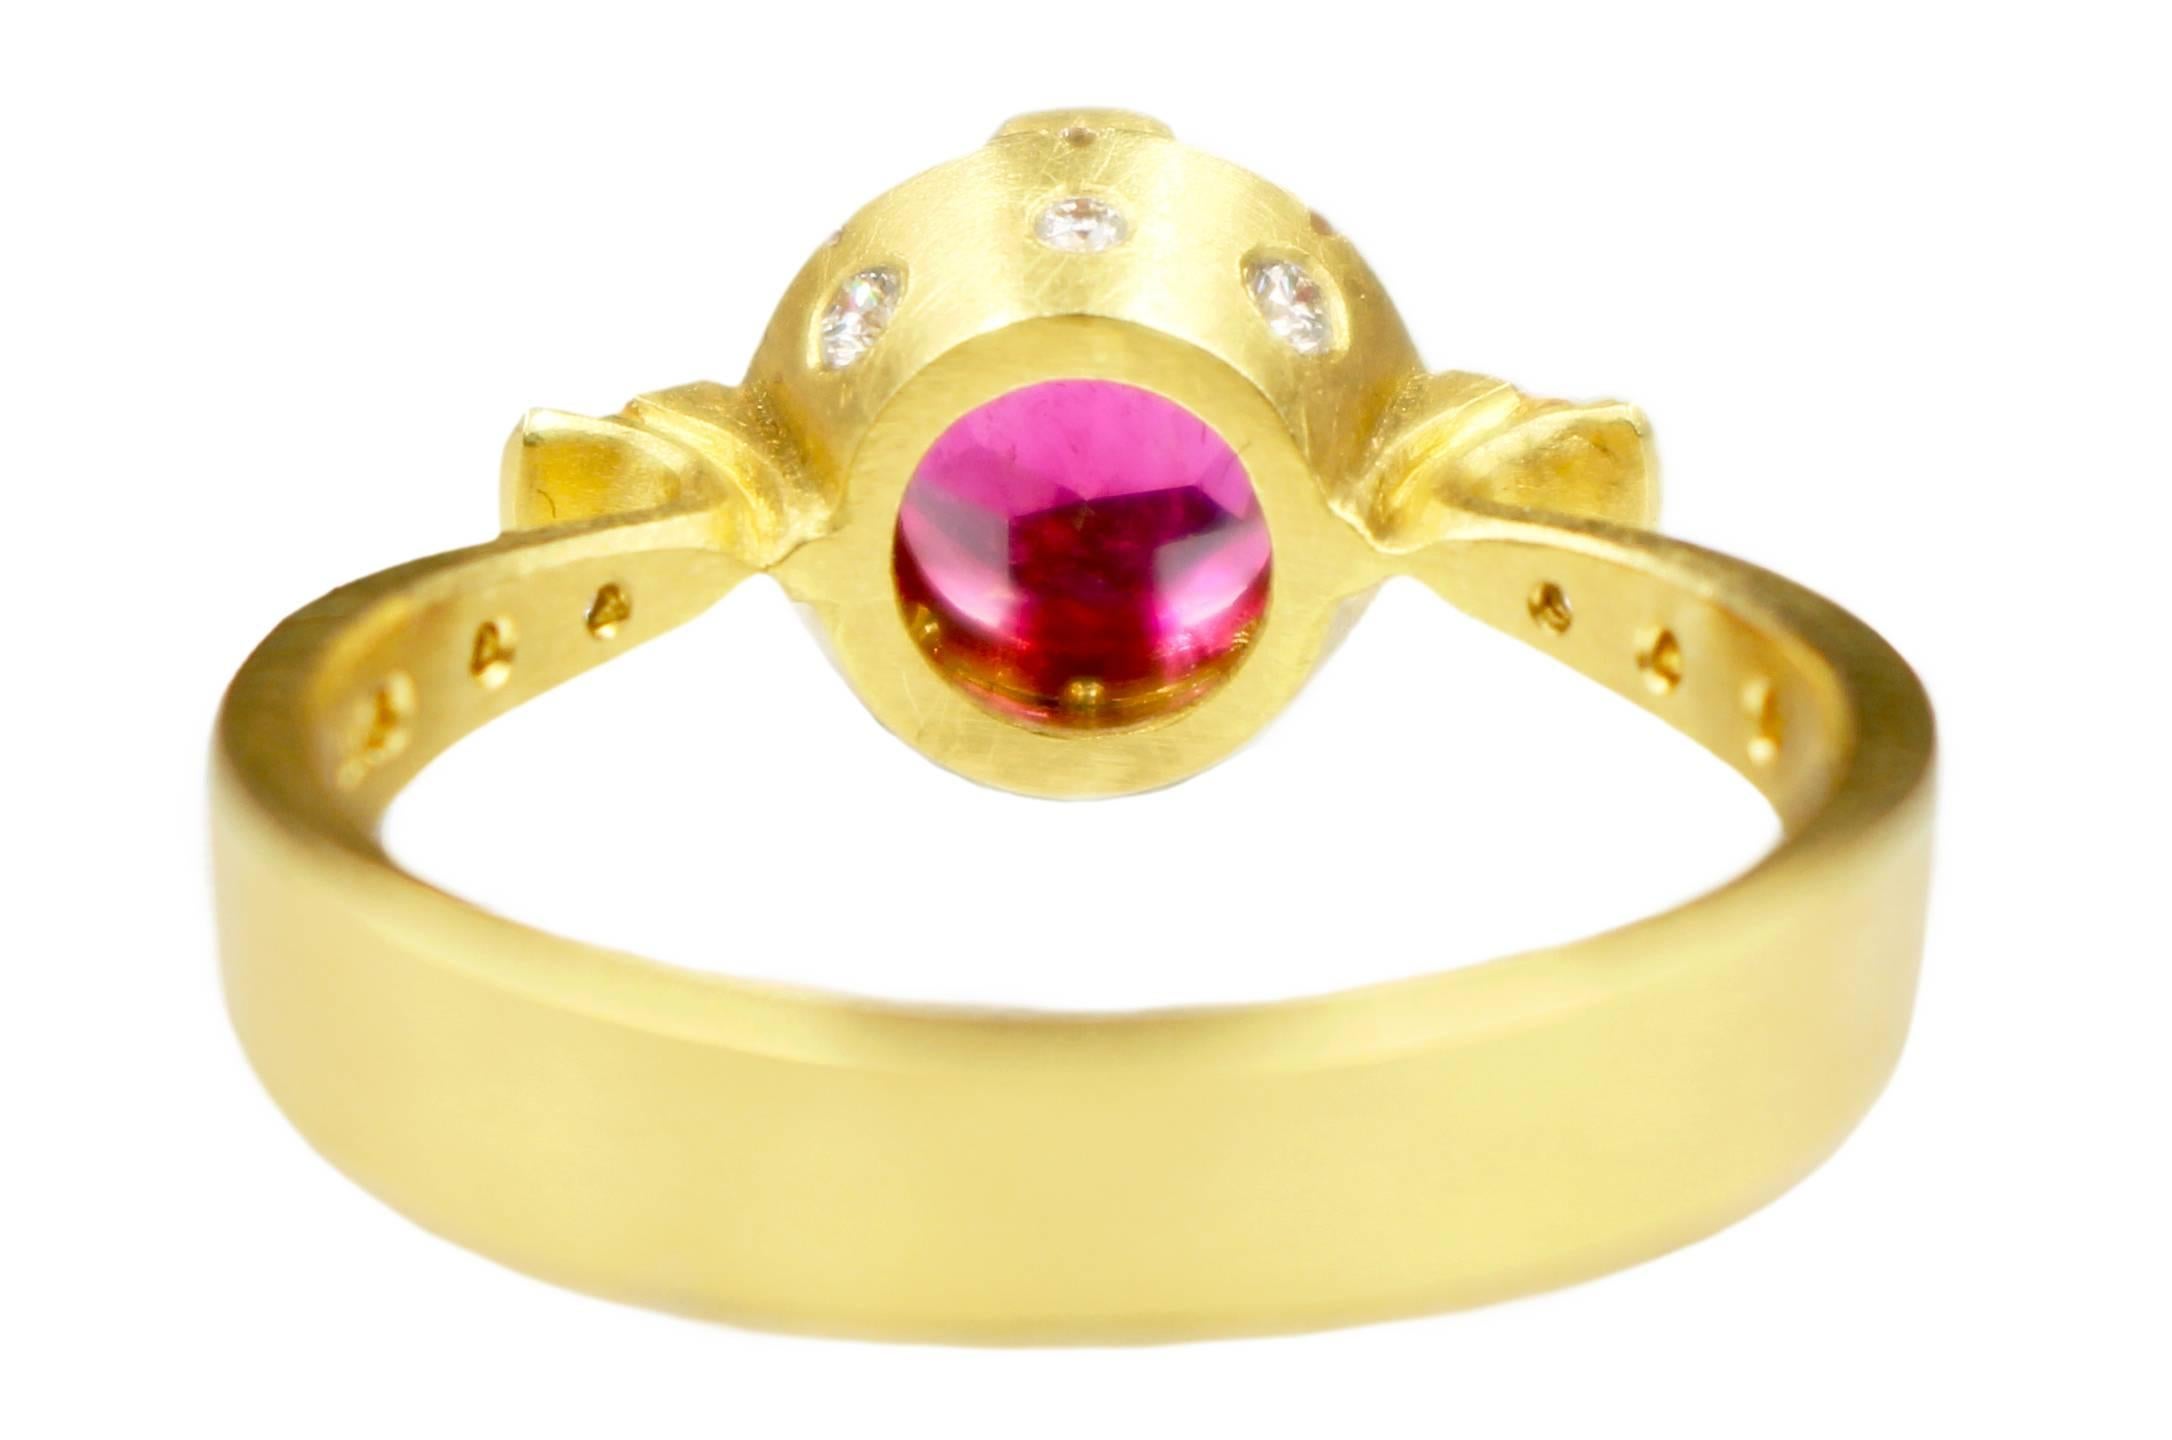 Robin Waynee
Rubellite Tourmaline Ring, 2018
18k gold, rubellite, tourmaline, diamond, spessartite garnet

Robin has an unprecedented record at the Saul Bell Design Awards, one of the most prestigious international jewelry competitions. She earned